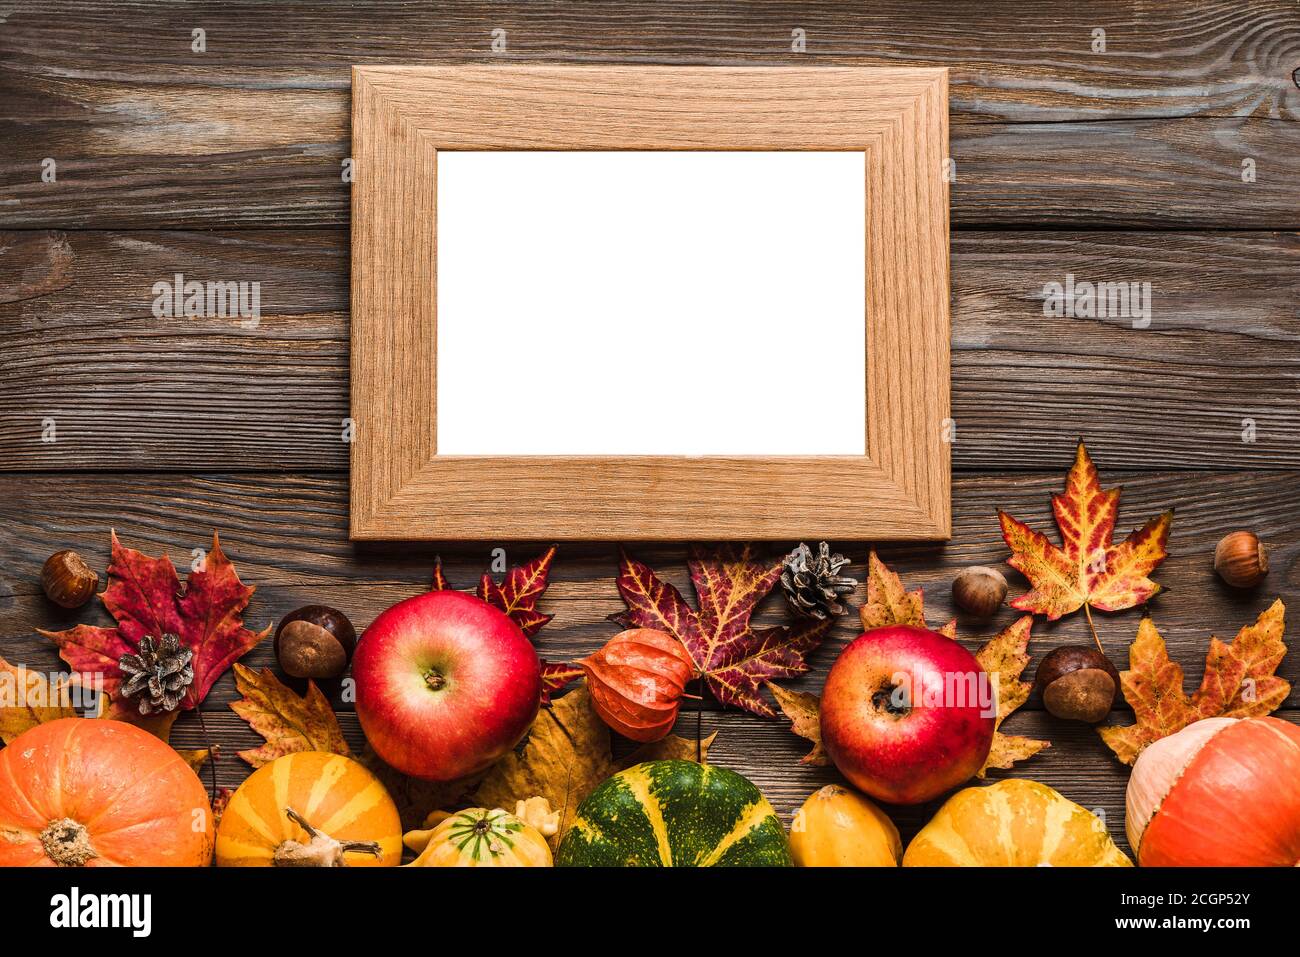 Thanksgiving, Halloween or autumn background. Blank photo frame with pumpkins, apples, leaves, dry flowers and nuts on rustic wooden table. Flat lay, Stock Photo